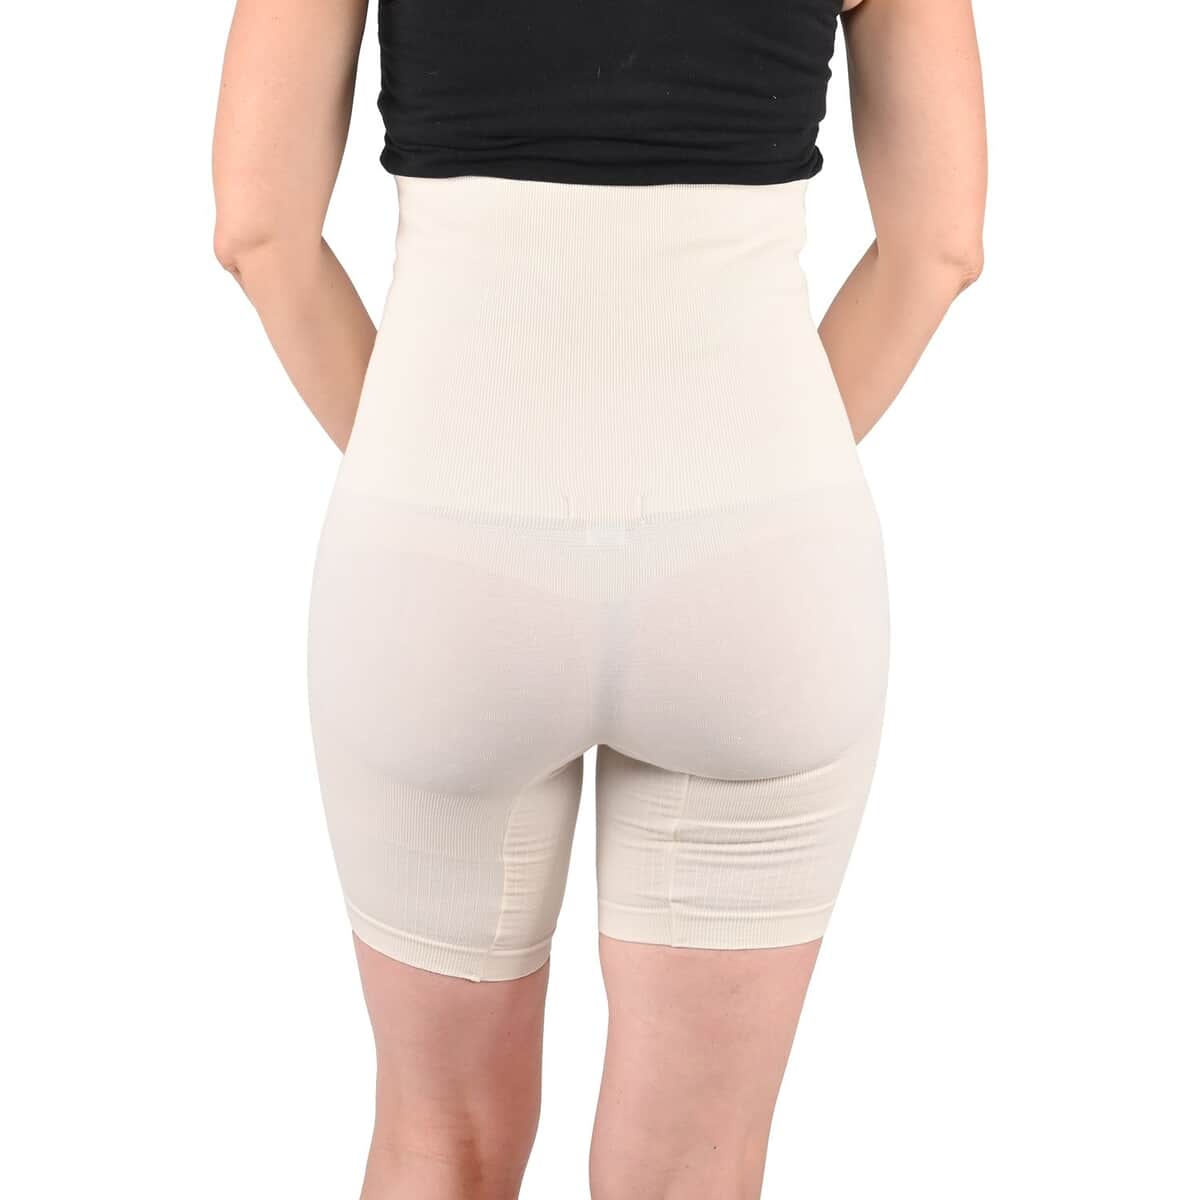 SANKOM Patent Organic Cotton Mid-Thigh Shapers - S/M | White image number 1